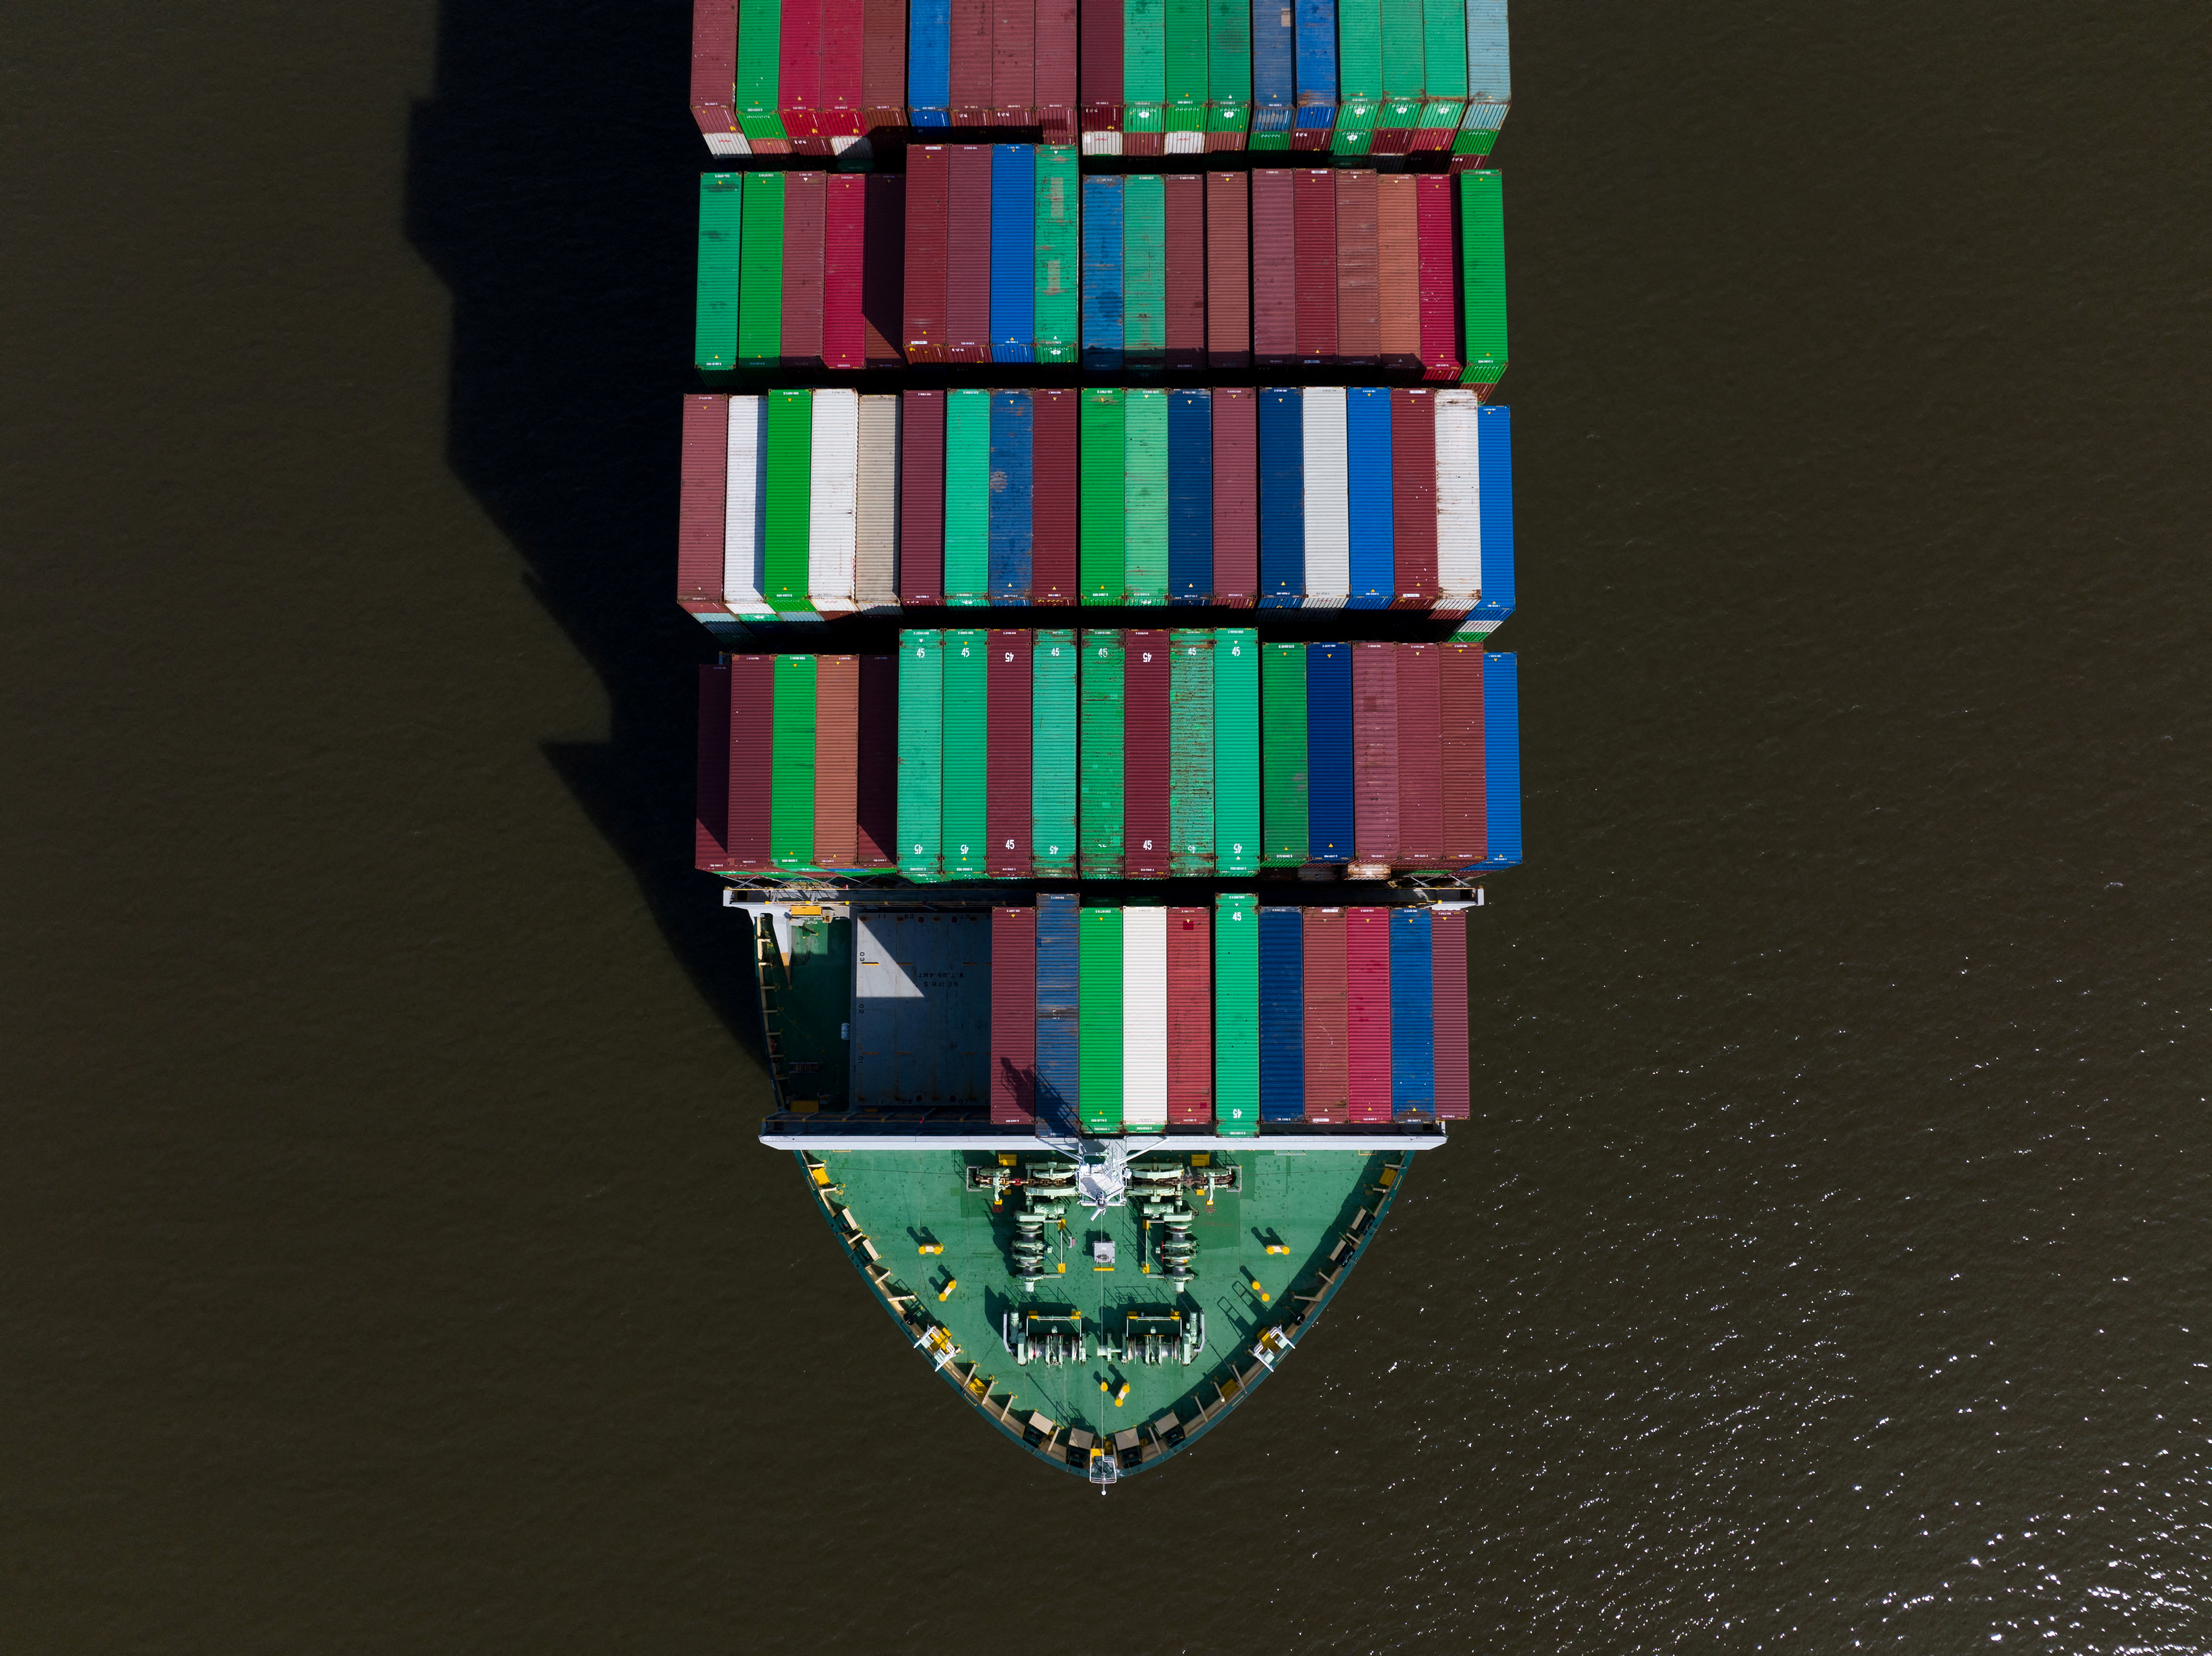 Evergreen Marine Corp container ship Ever Forward sits grounded in the Chesapeake Bay near Maryland